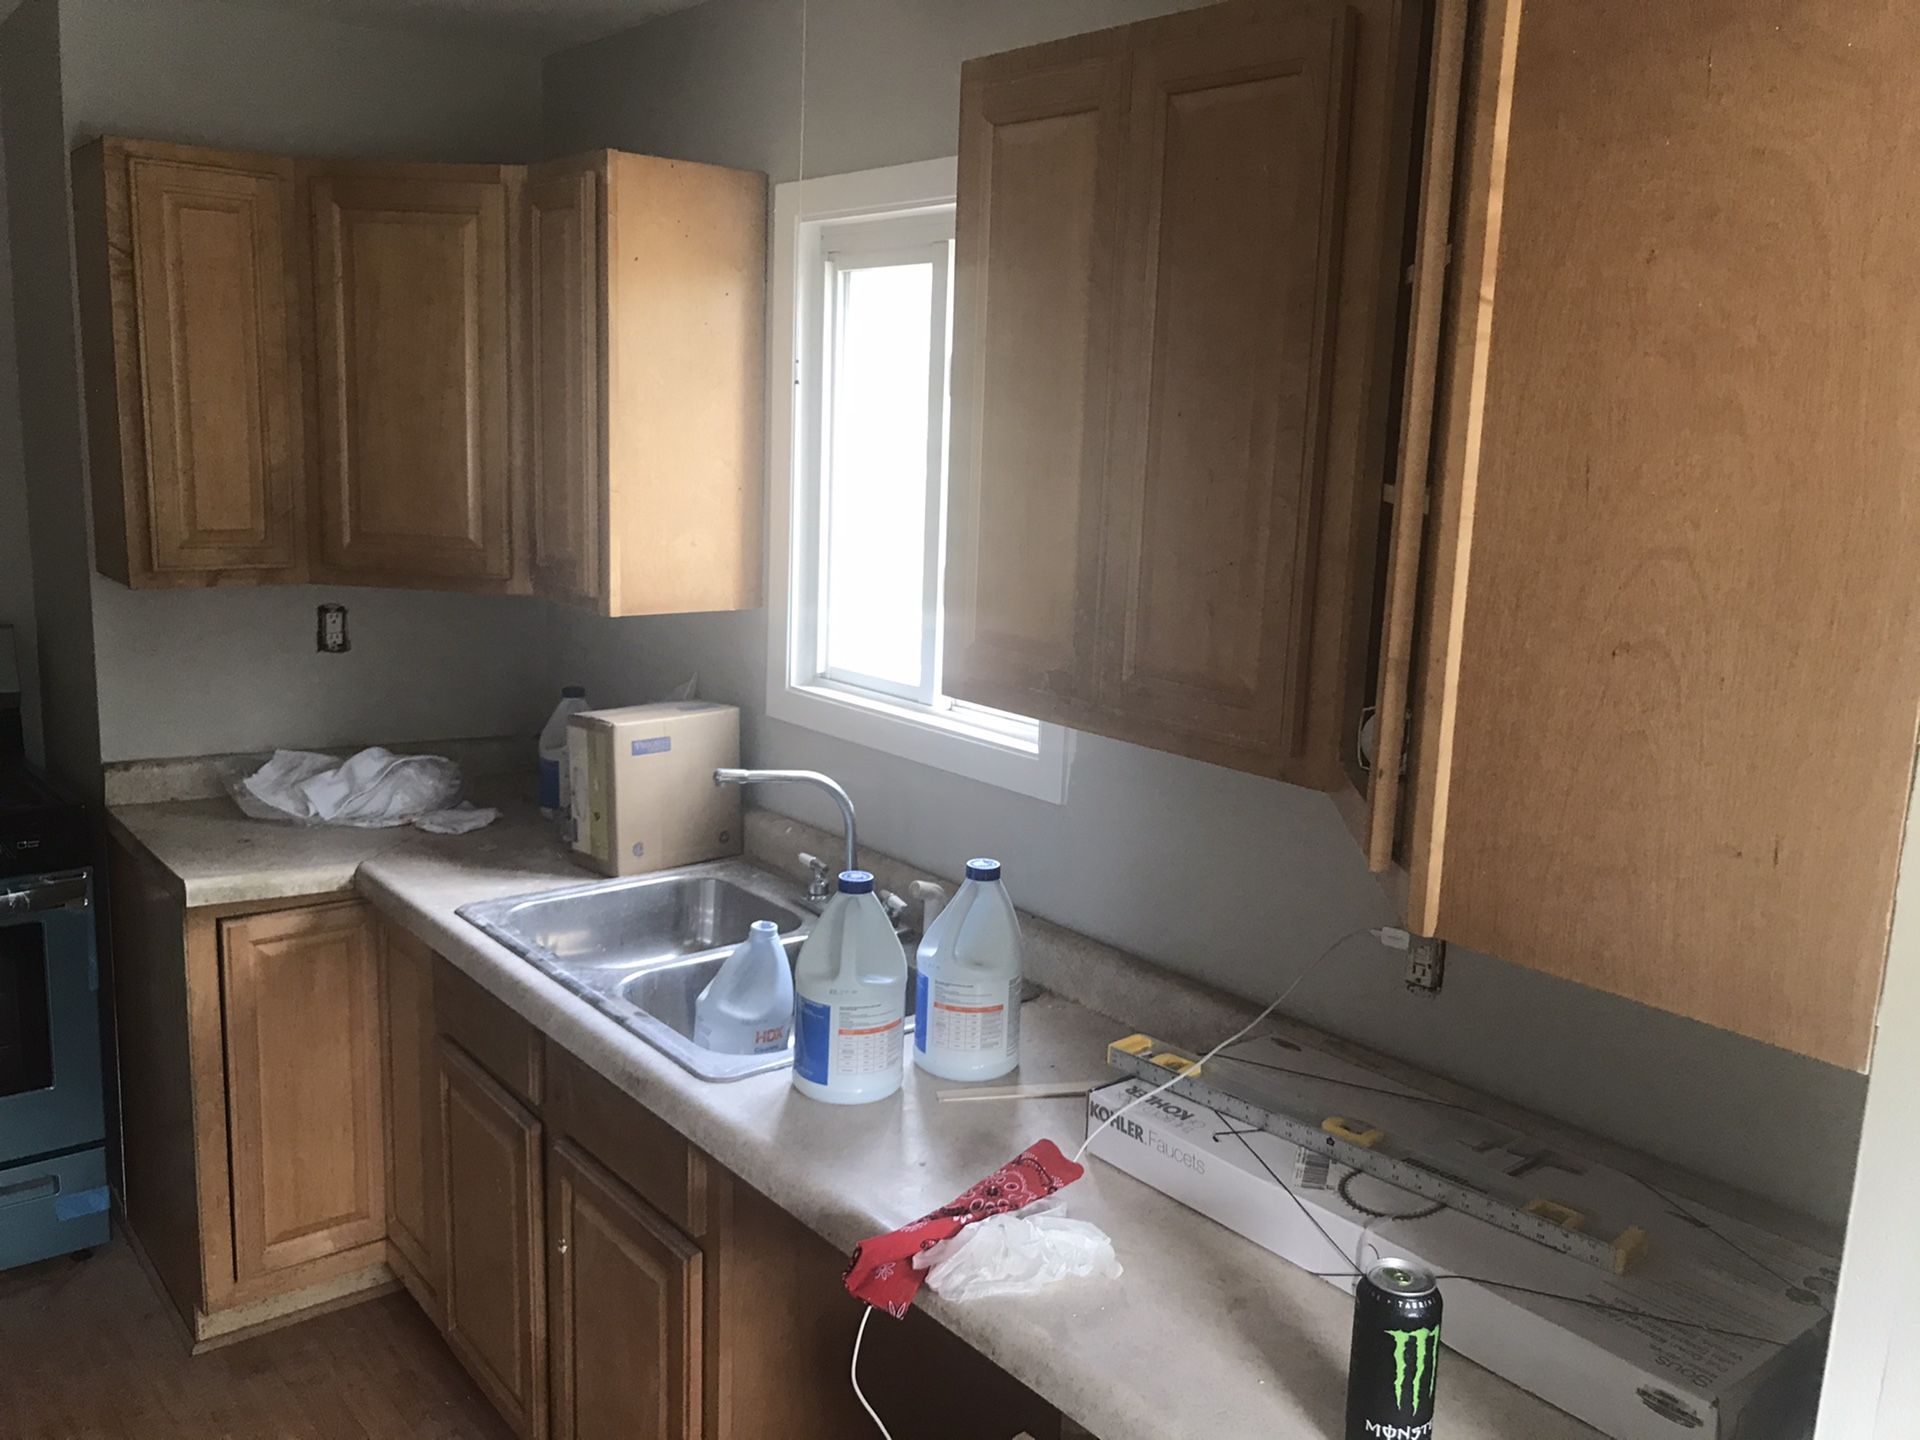 Kitchen Cabinets and Sink and Countertop